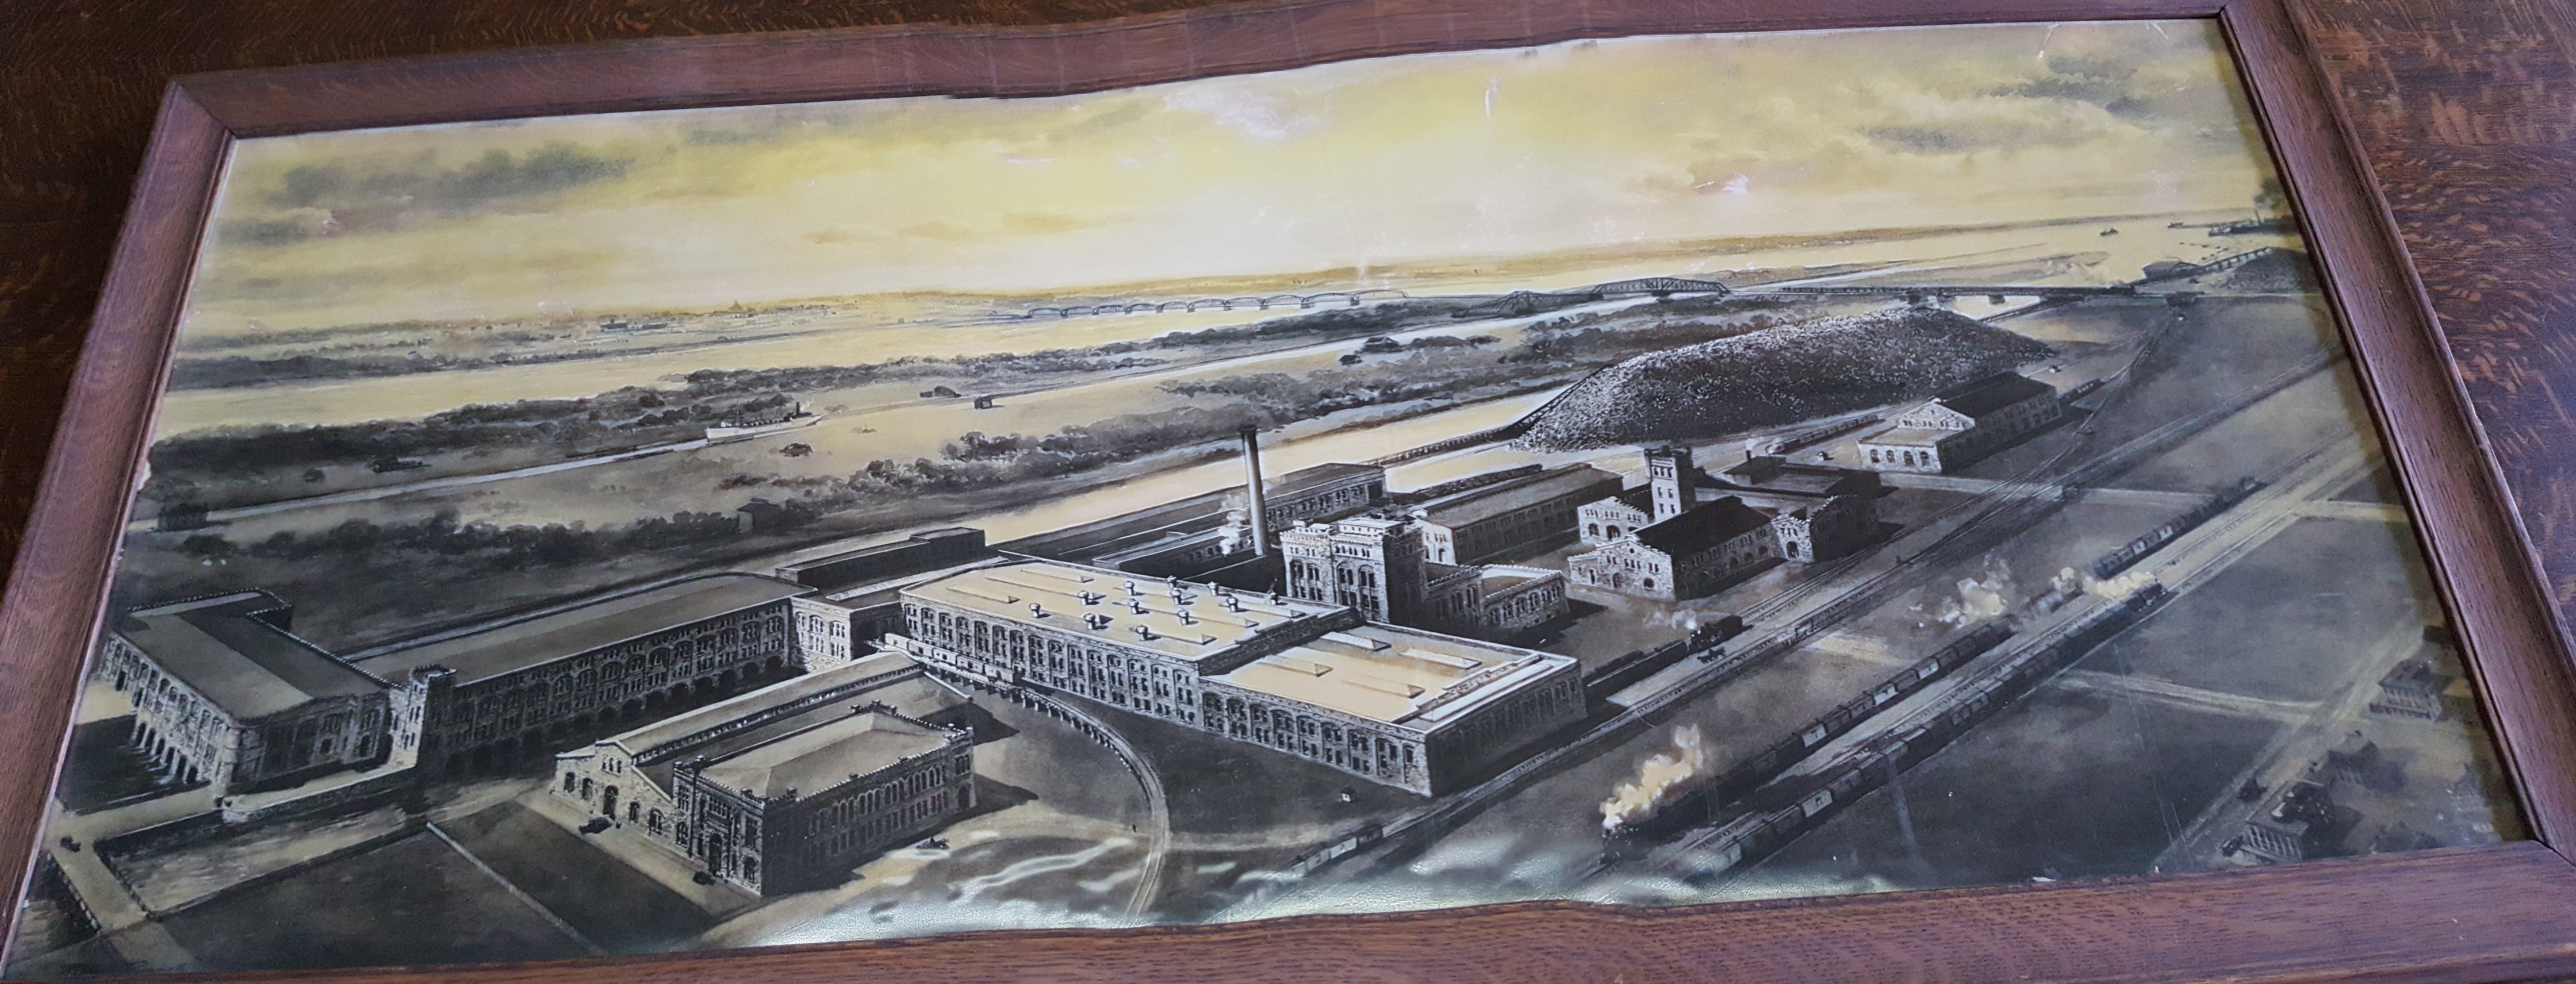 Photograph of a framed concept drawing of the mill.